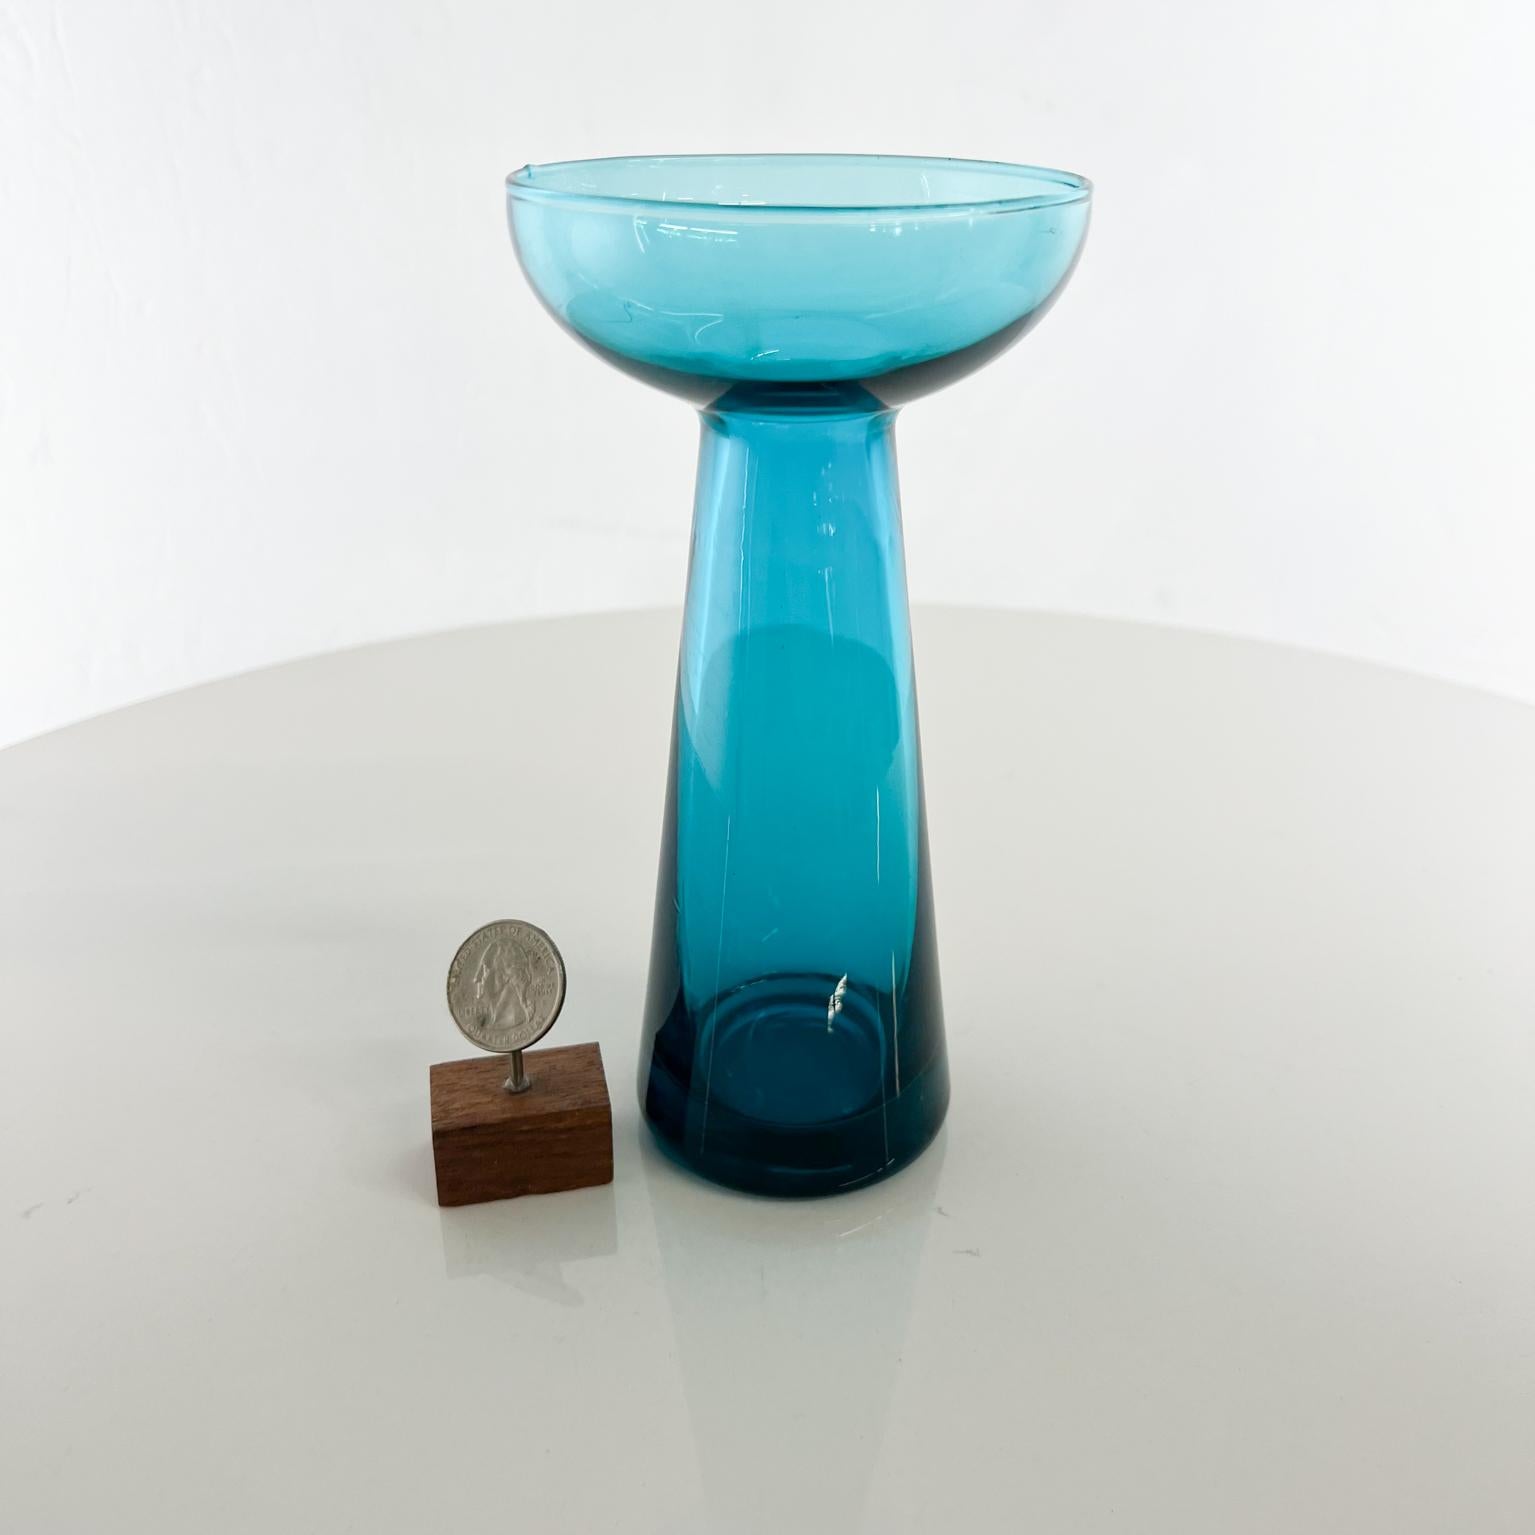 1960s Light blue Scandinavian Modern Art Glass bud vase.
Unmarked
Measures: 6.75 tall x 3.5 diameter
Preowned vintage condition.
See images provided.
 